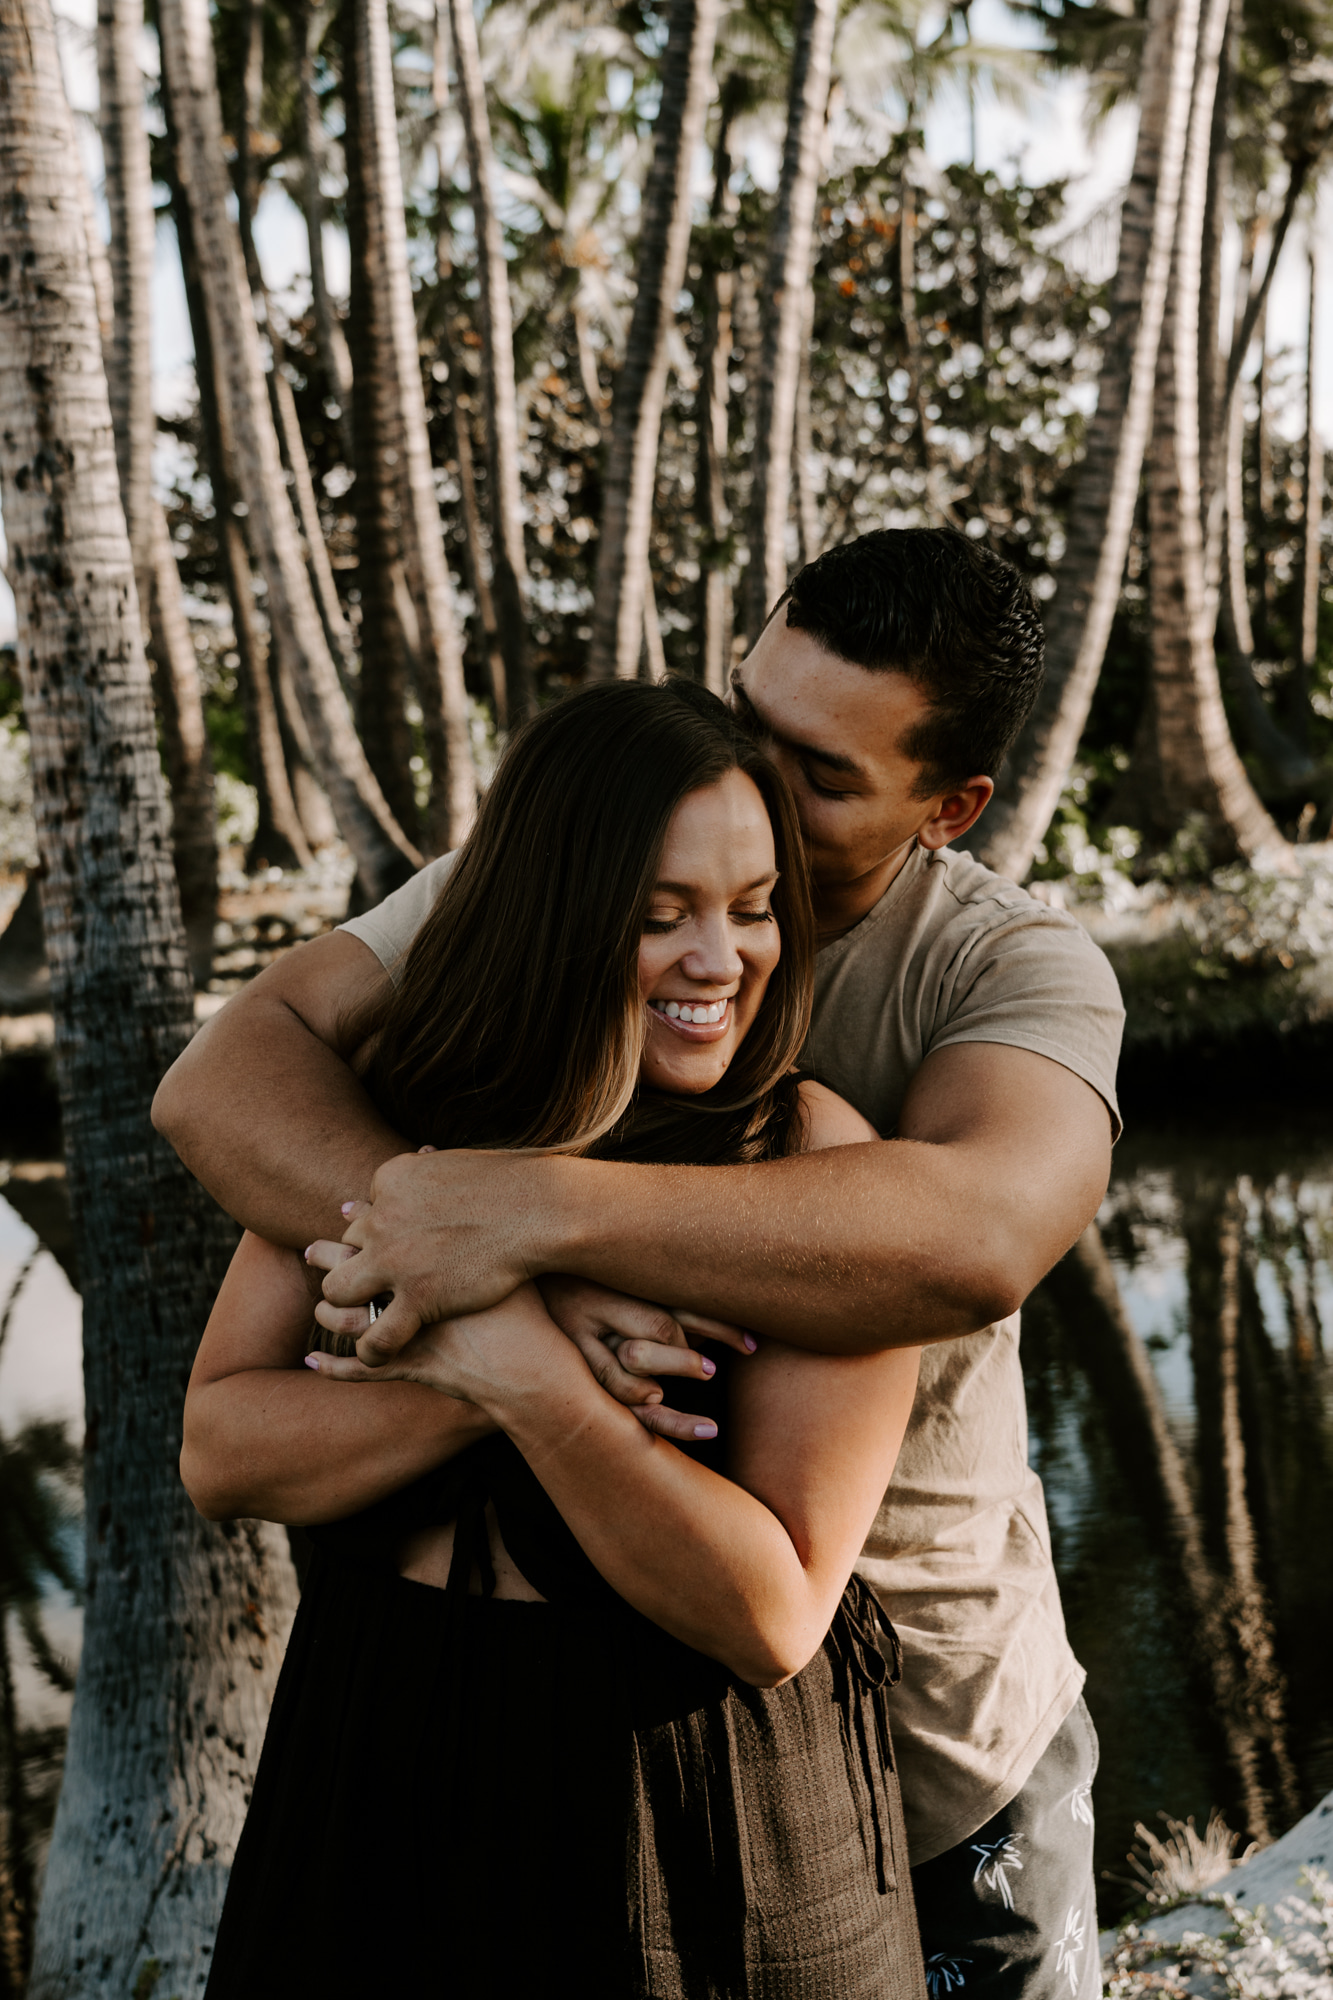 San Francisco blogger Ashley Zeal from Two Peas in a Prada shares "How Our Relationship Changed Post-Engagement." The ten-week wedding countdown is on!